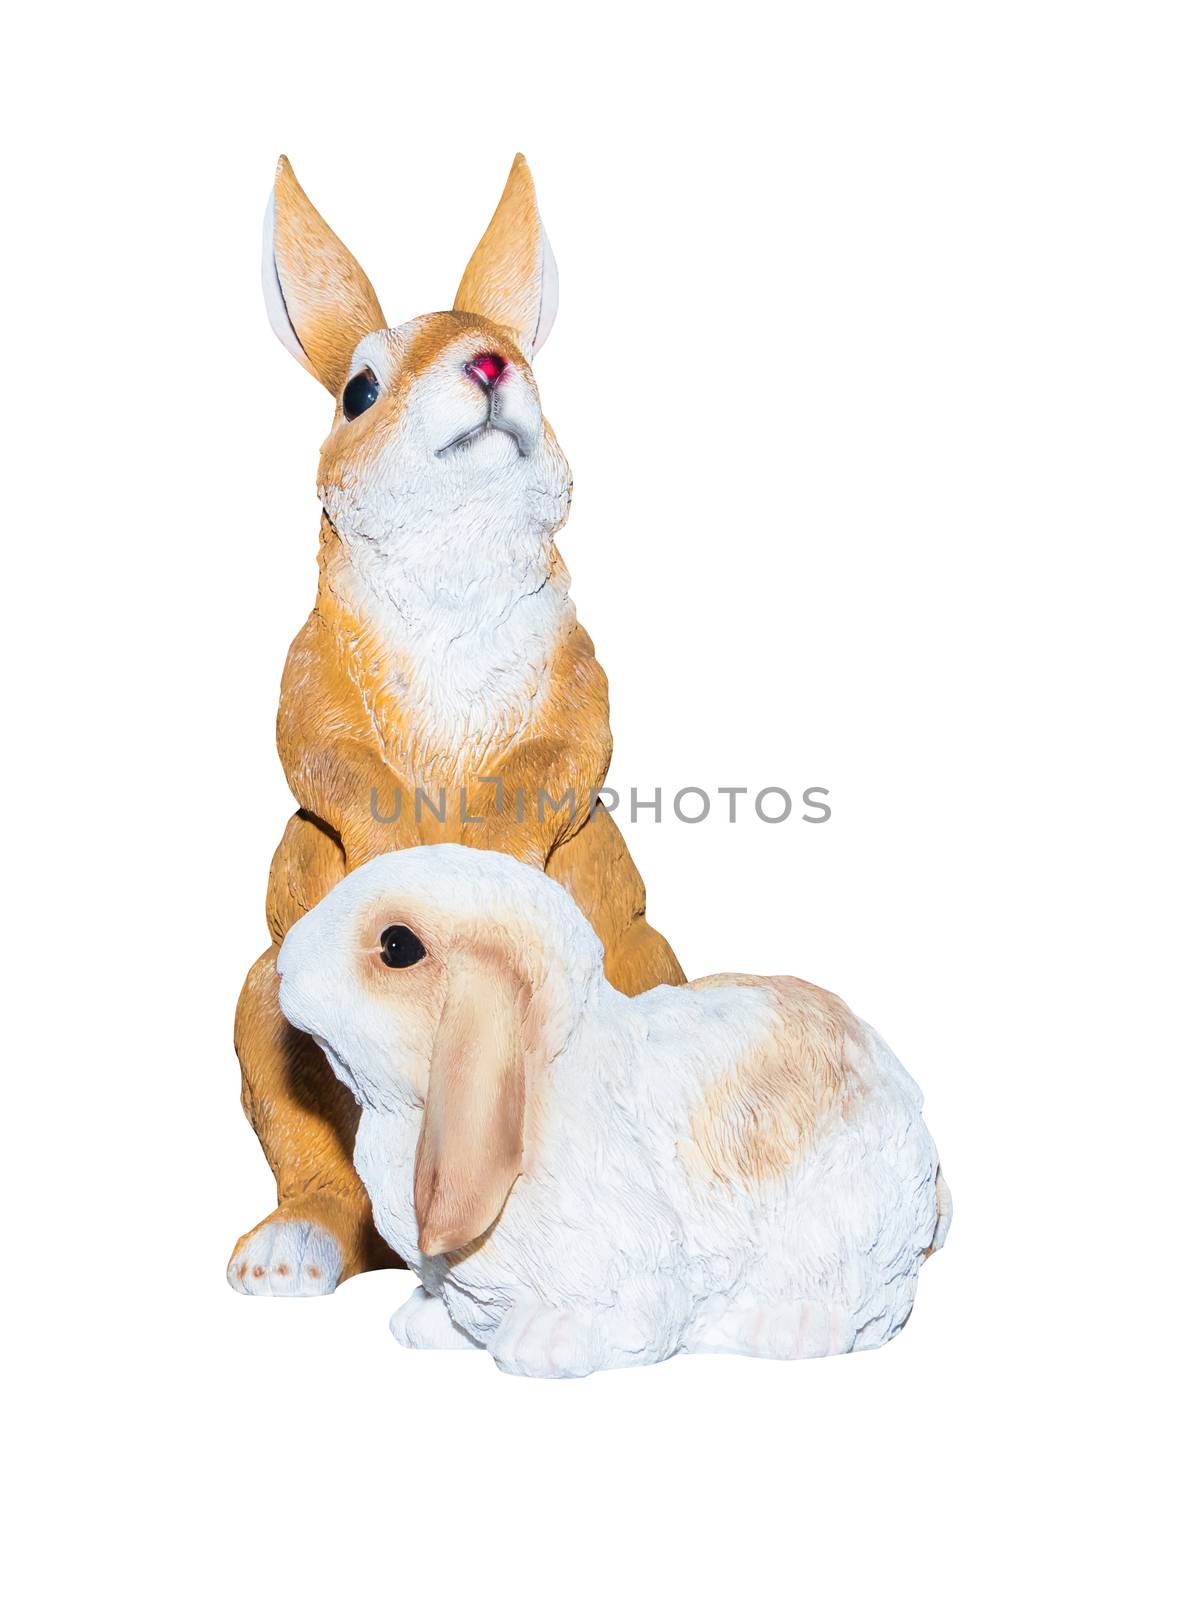 Two rabbits dolly toy is standing isolated on a white background